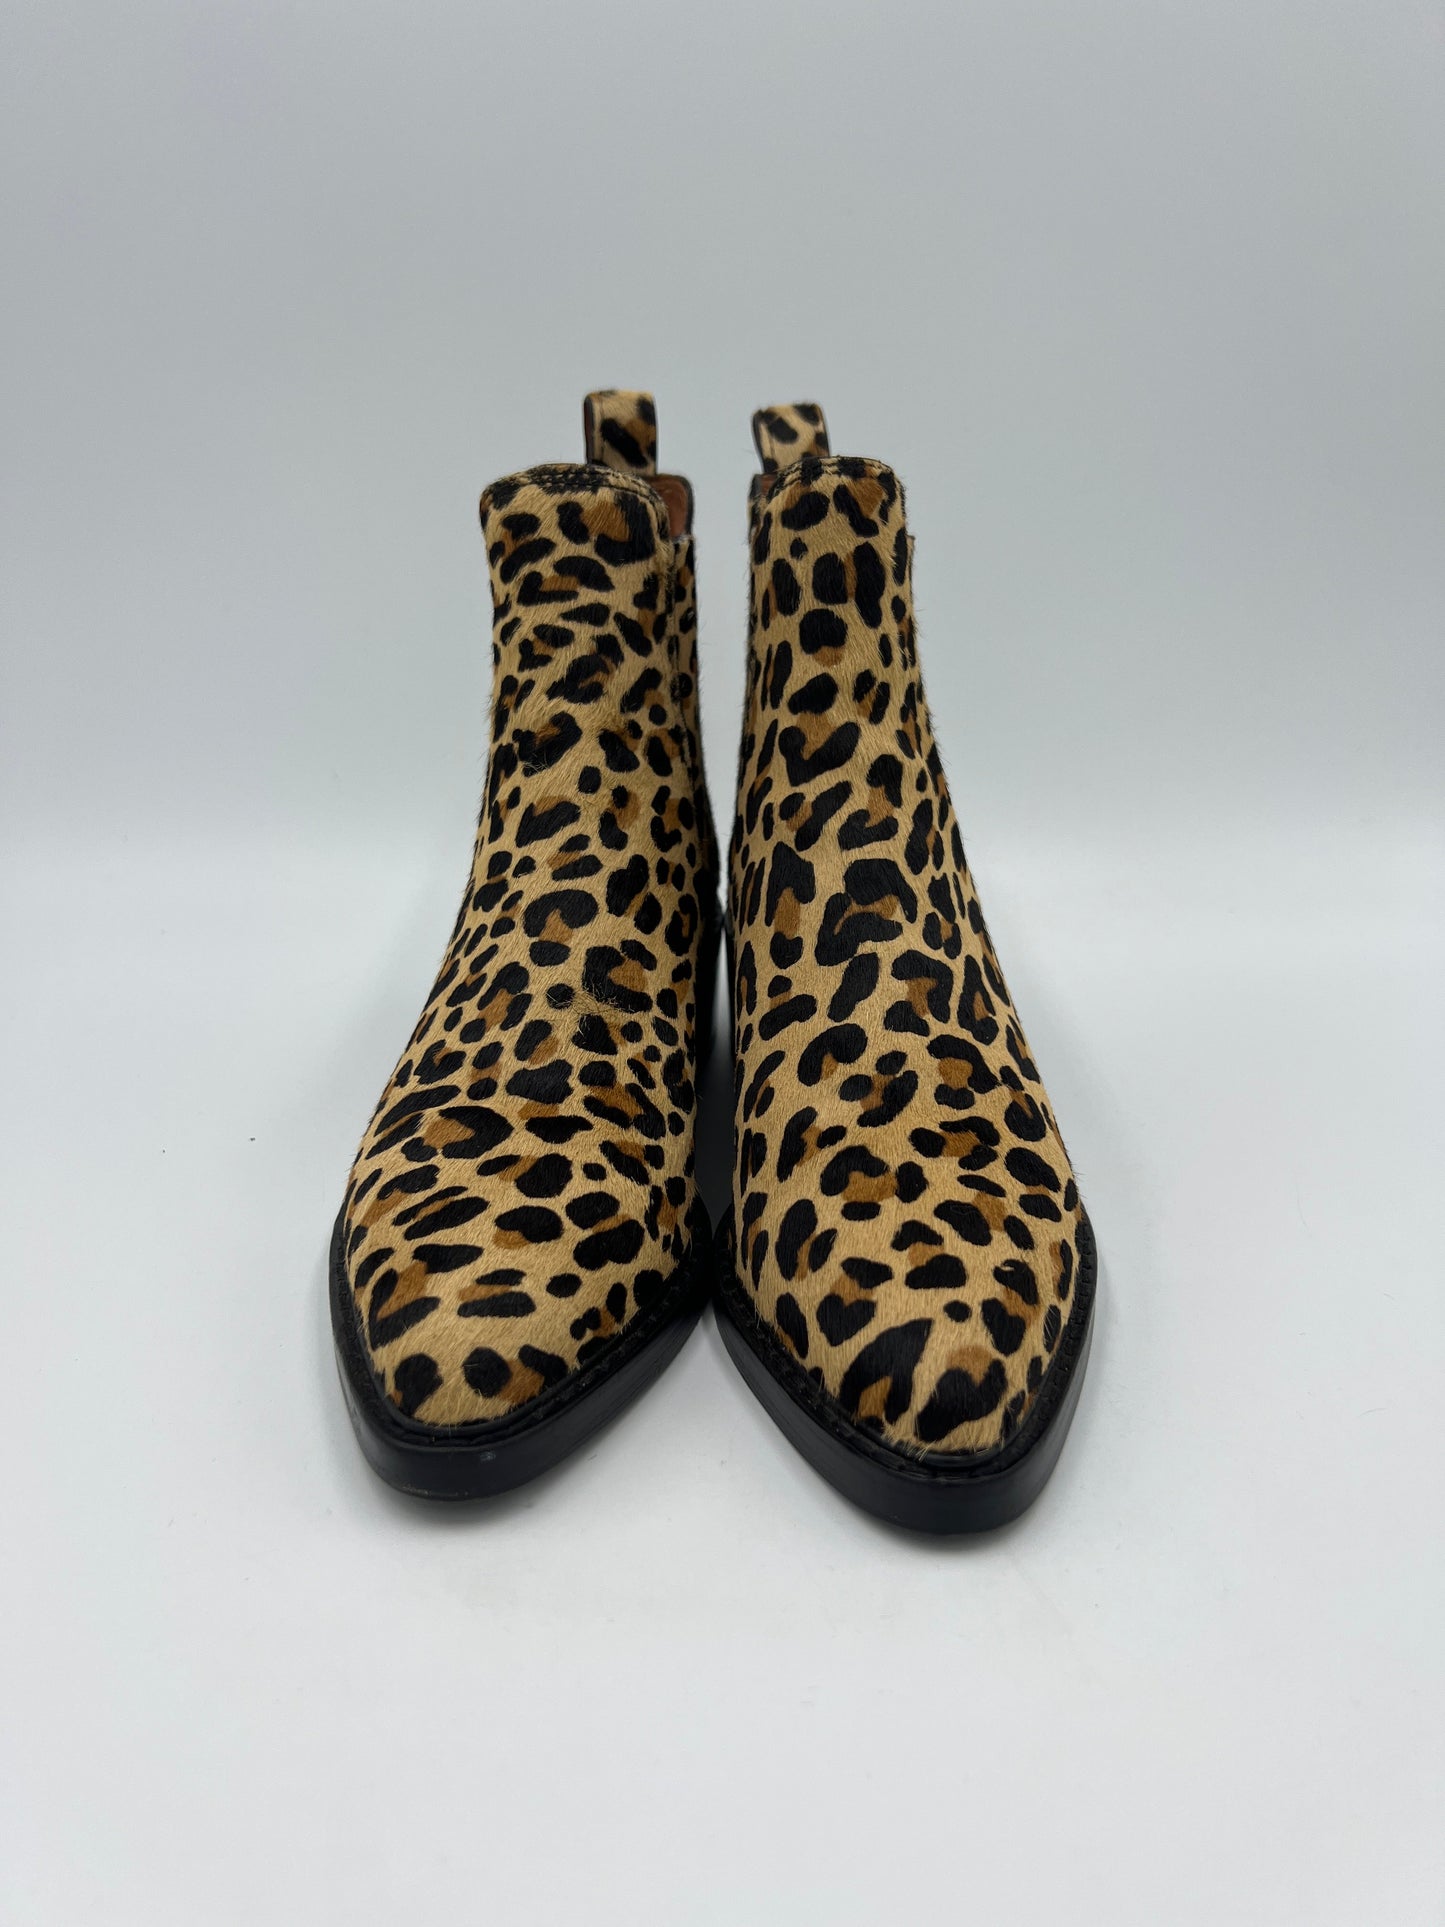 Boots Designer By Coach  Size: 5.5